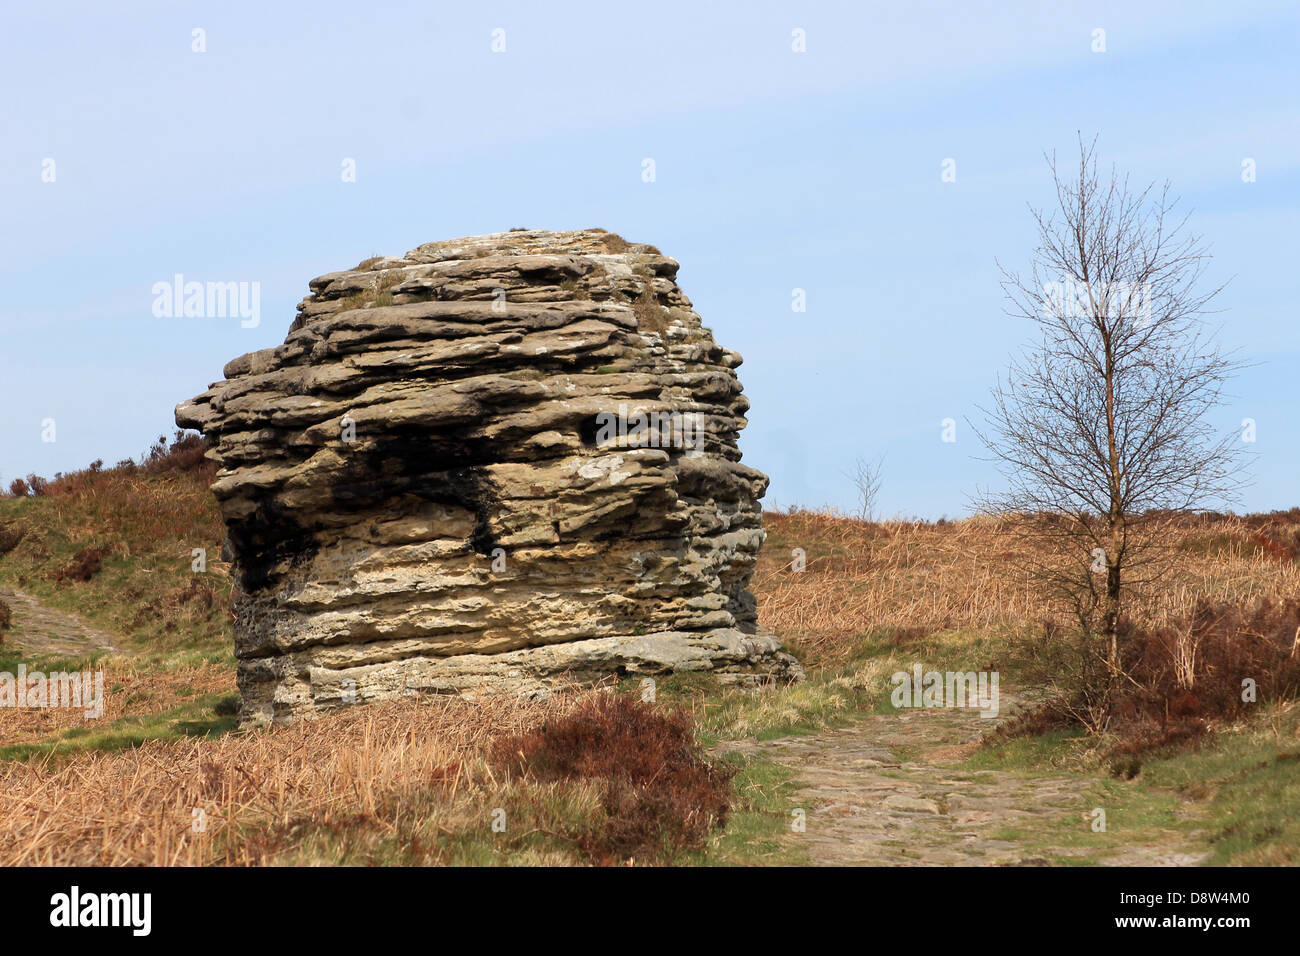 Rock formation in North Yorkshire Moors National Park, England. Stock Photo